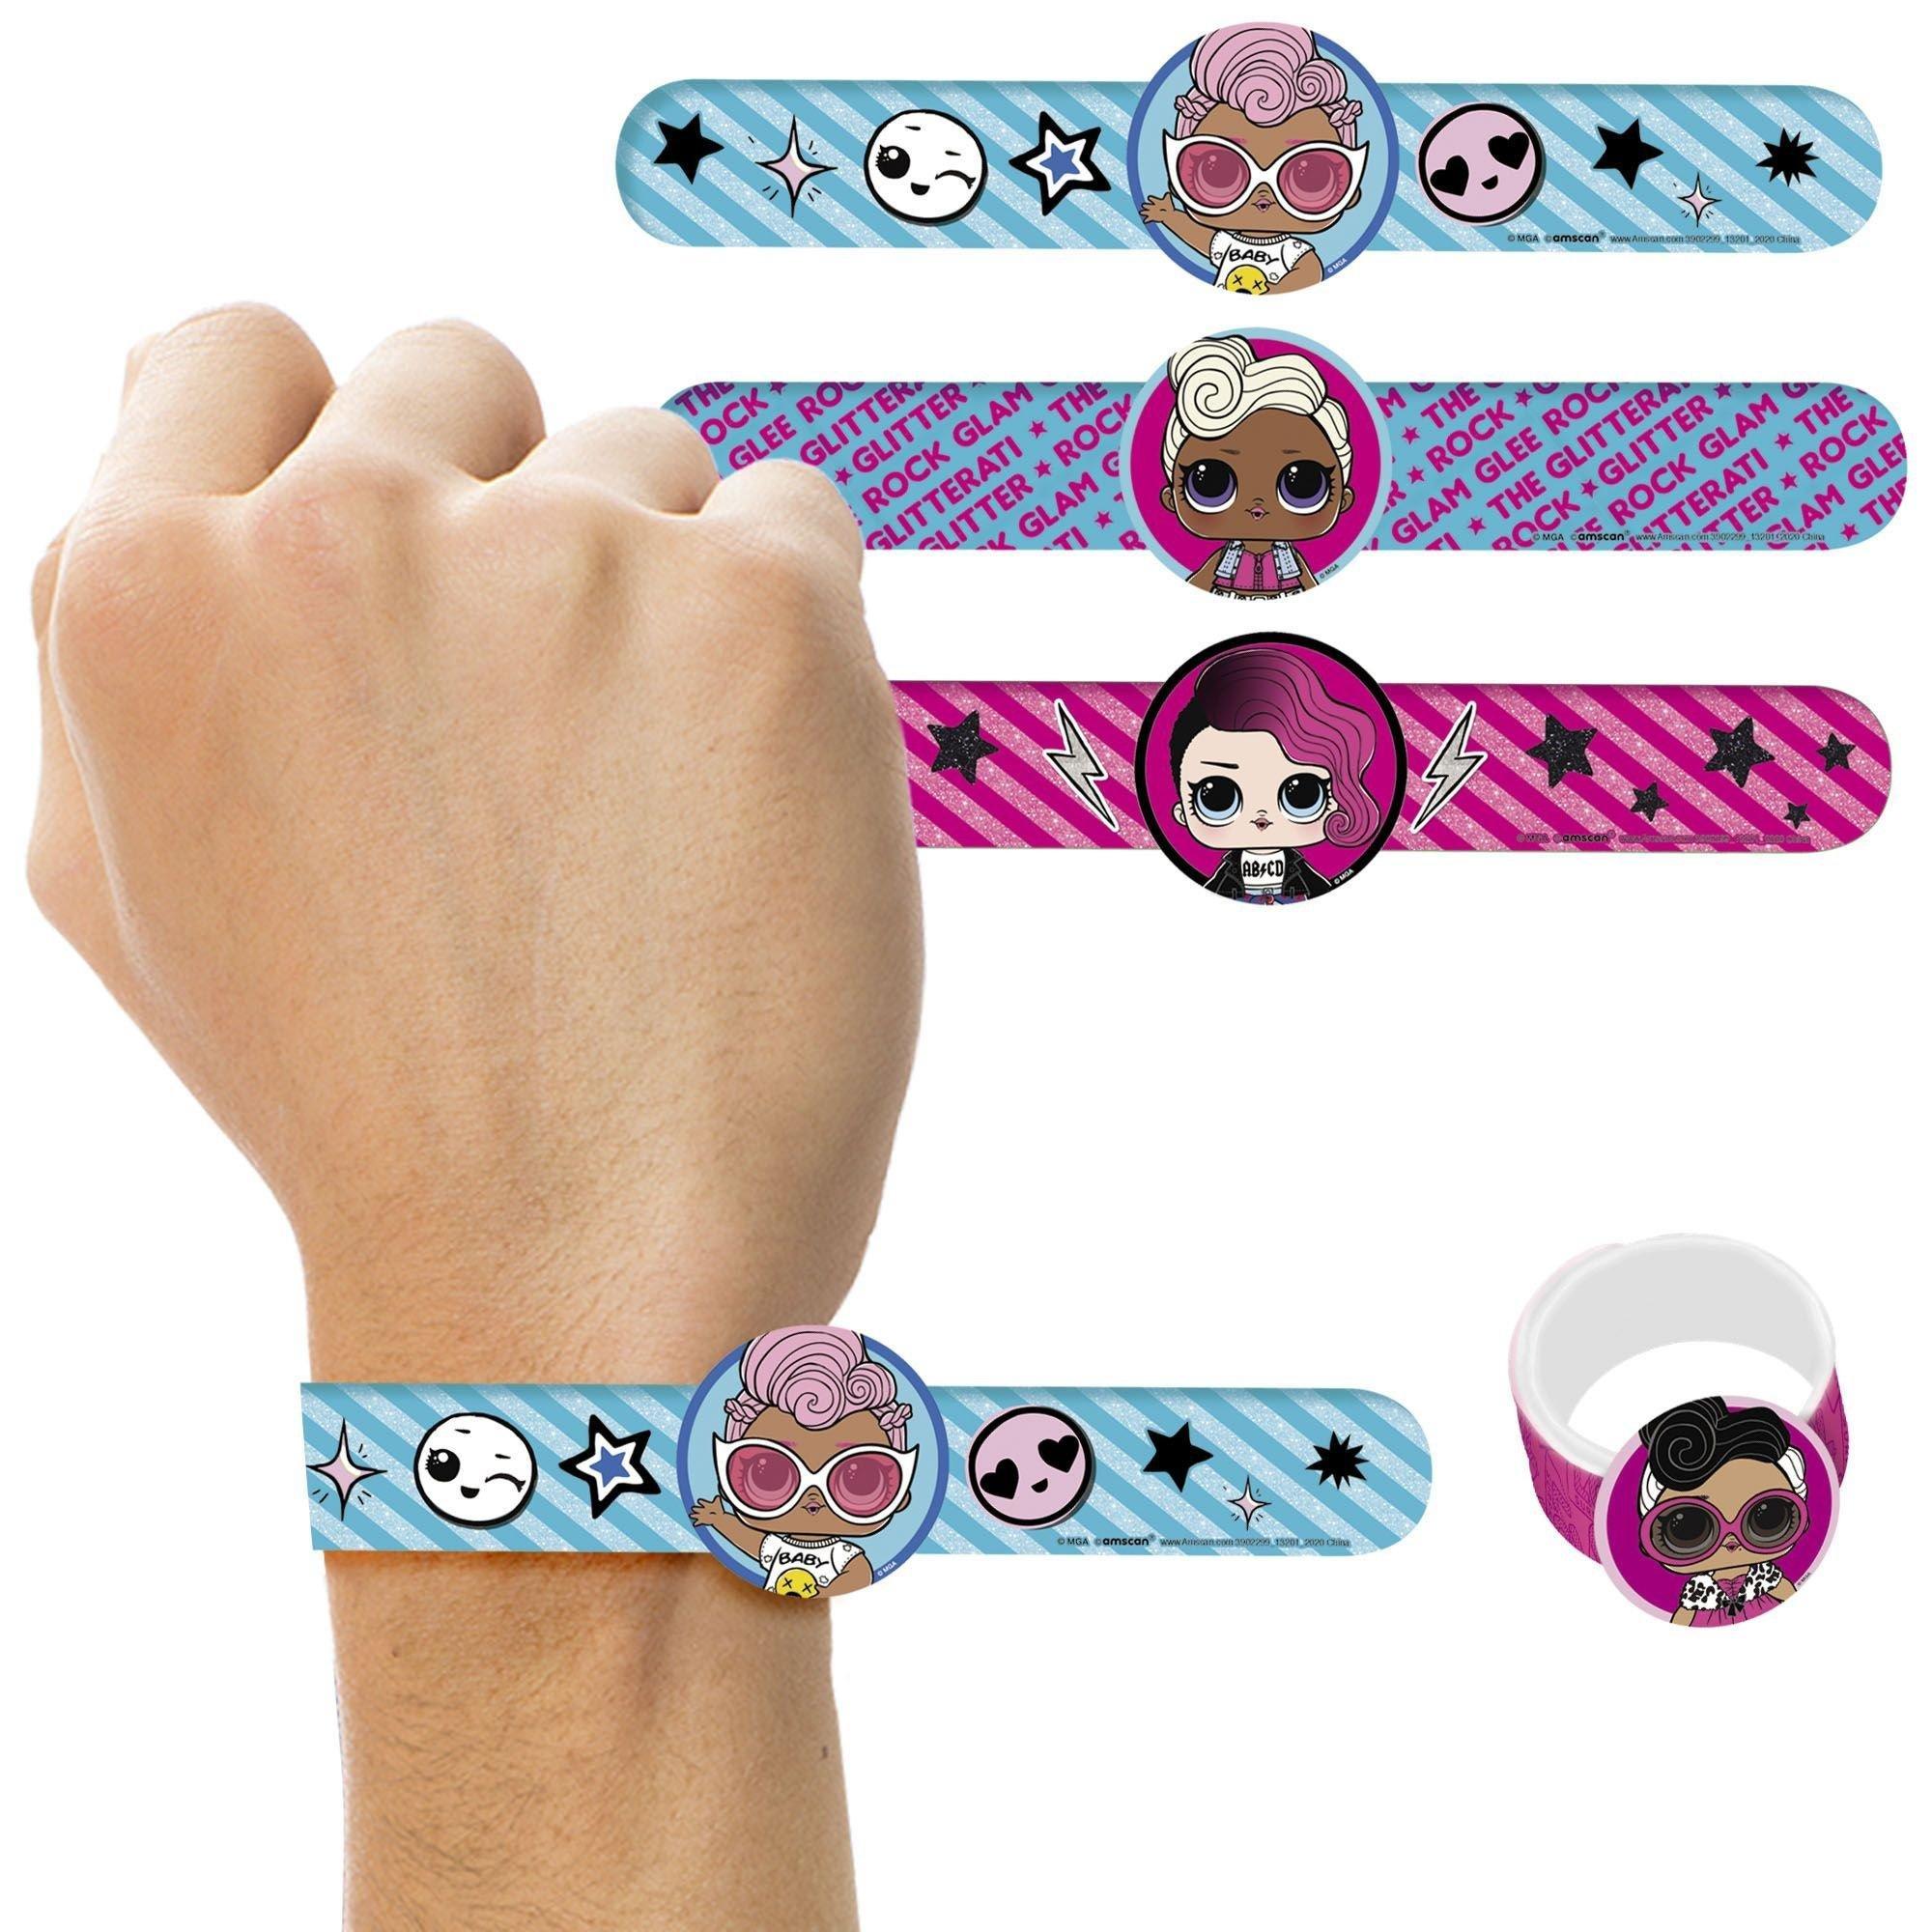 L.O.L. Surprise ! Bracelet With Charms For Girls Featuring Her Favourite  Lol Dolls, Set Of 2 Pink Elasticated Bracelets For Children